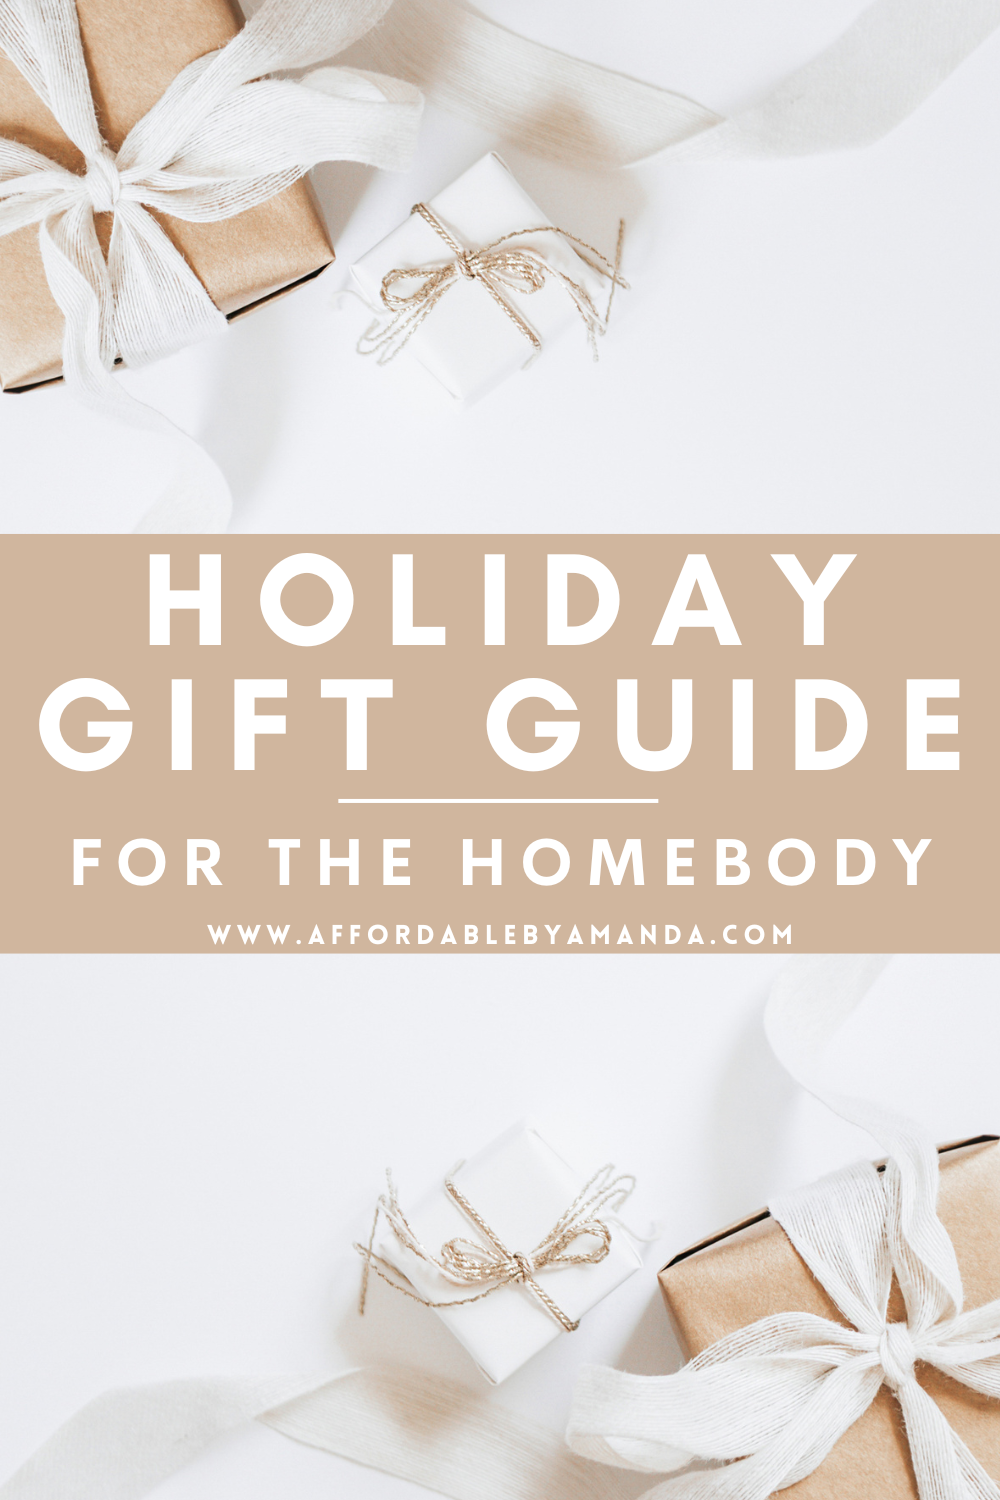 Gifts for the Homebody - Affordable by Amanda